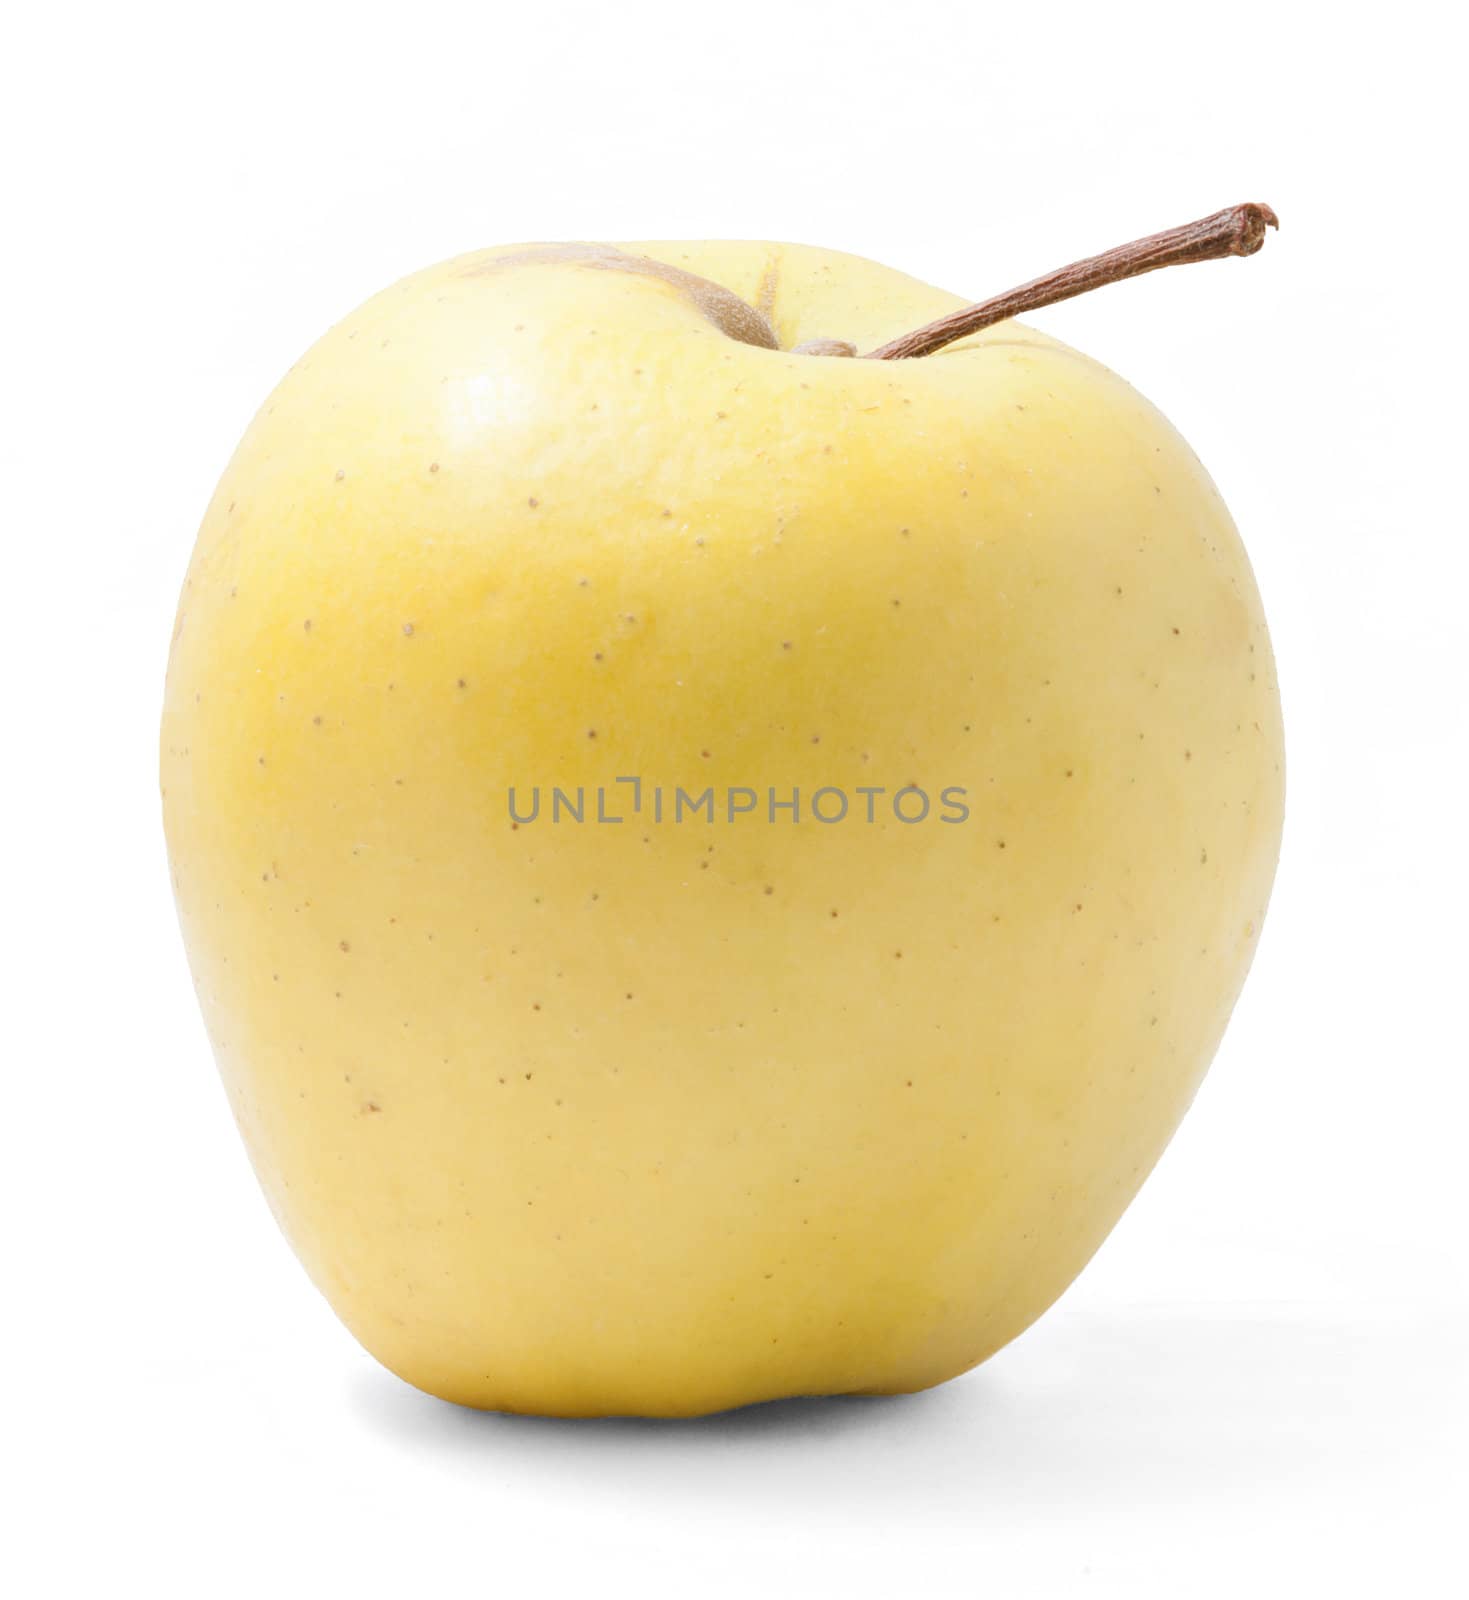 The apple isolated on the white background.